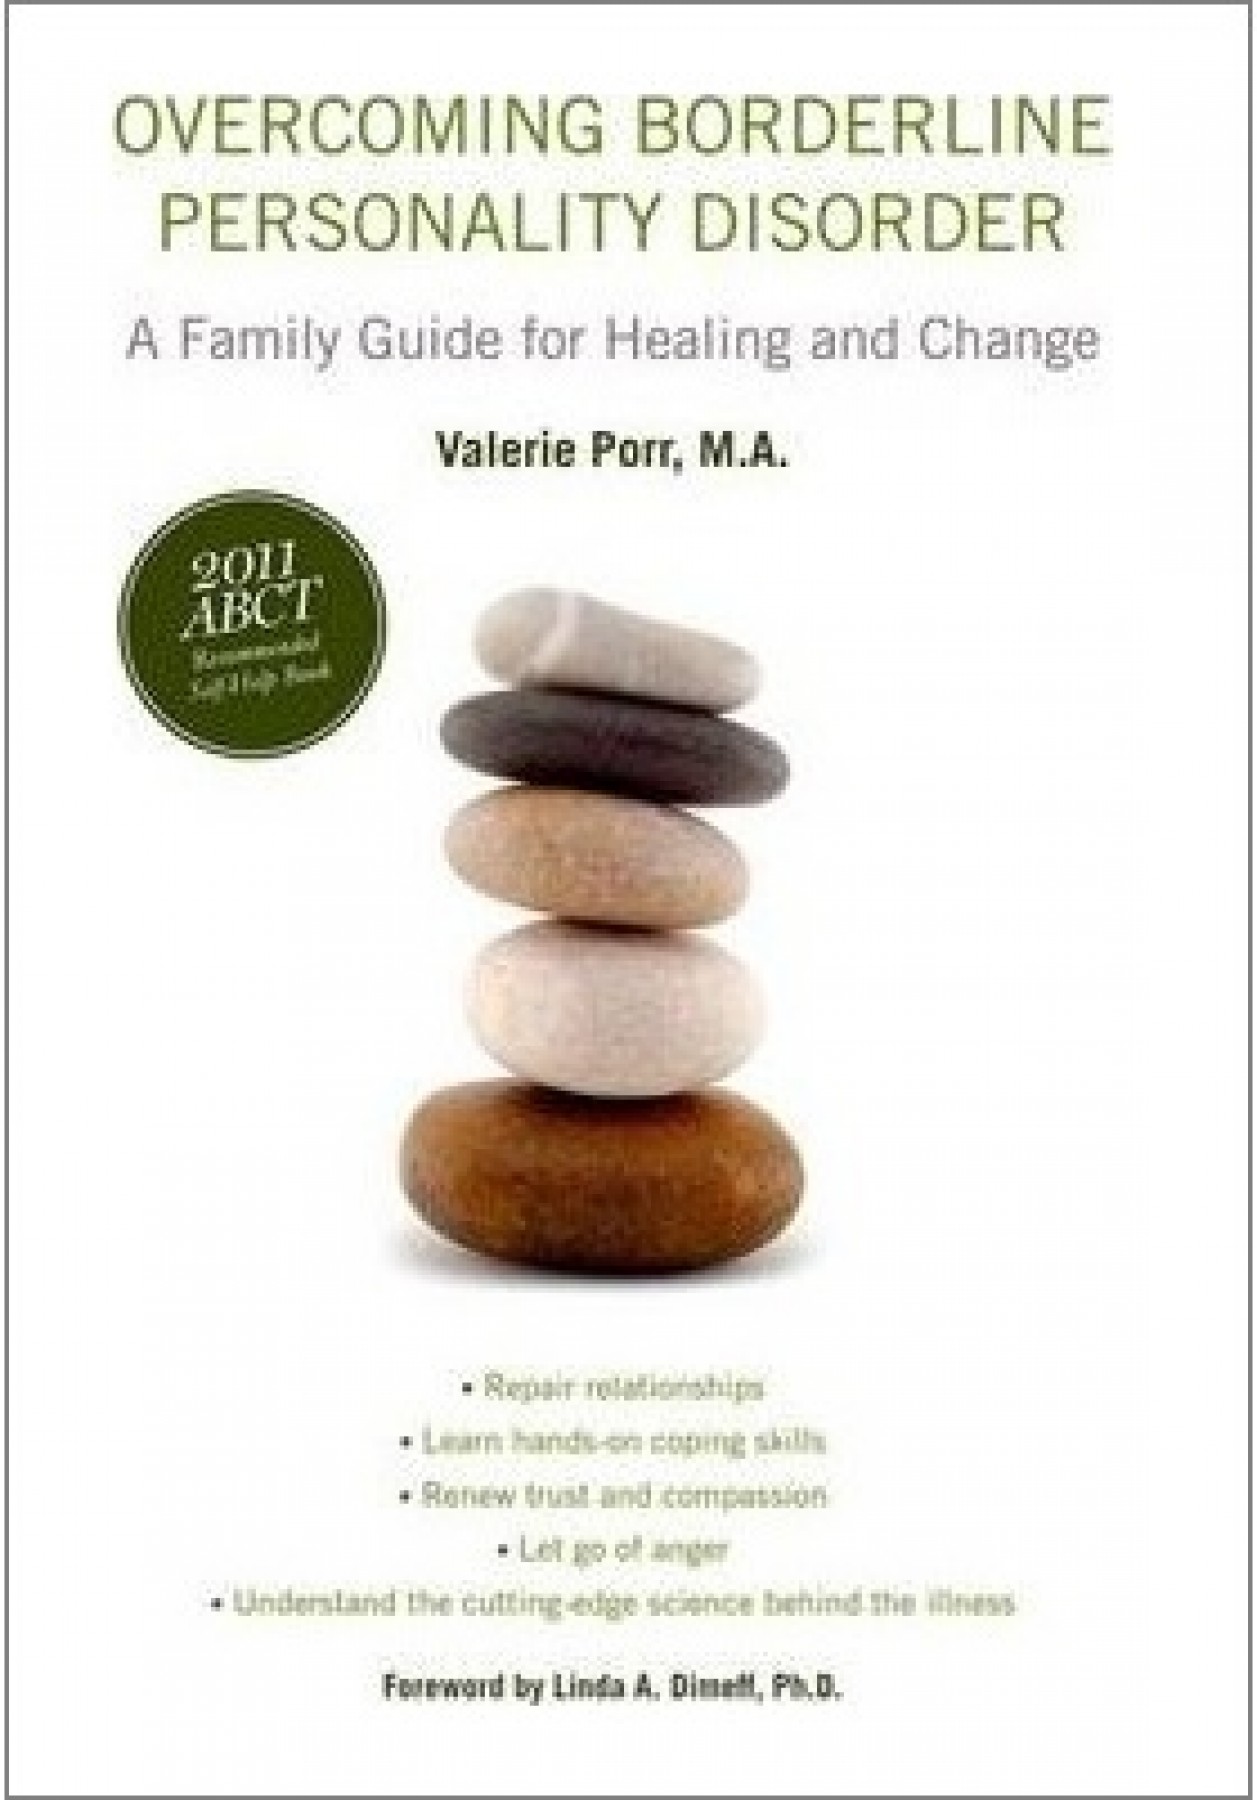 Overcoming borderline personality disorder: A family guide to healing and change